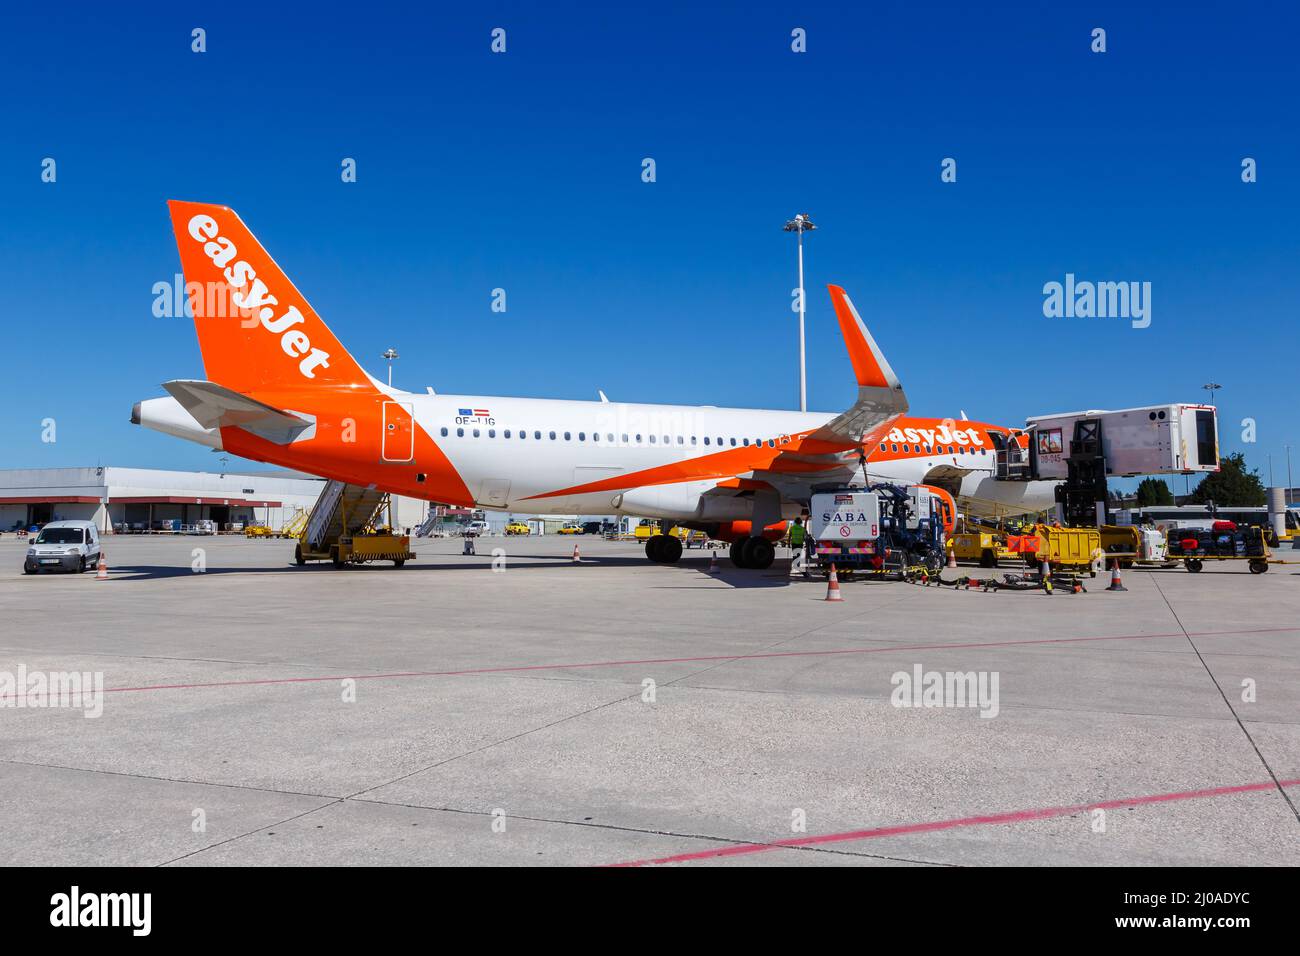 Porto, Portugal - September 21, 2021: EasyJet Airbus A320 airplane at Porto airport (OPO) in Portugal. Stock Photo